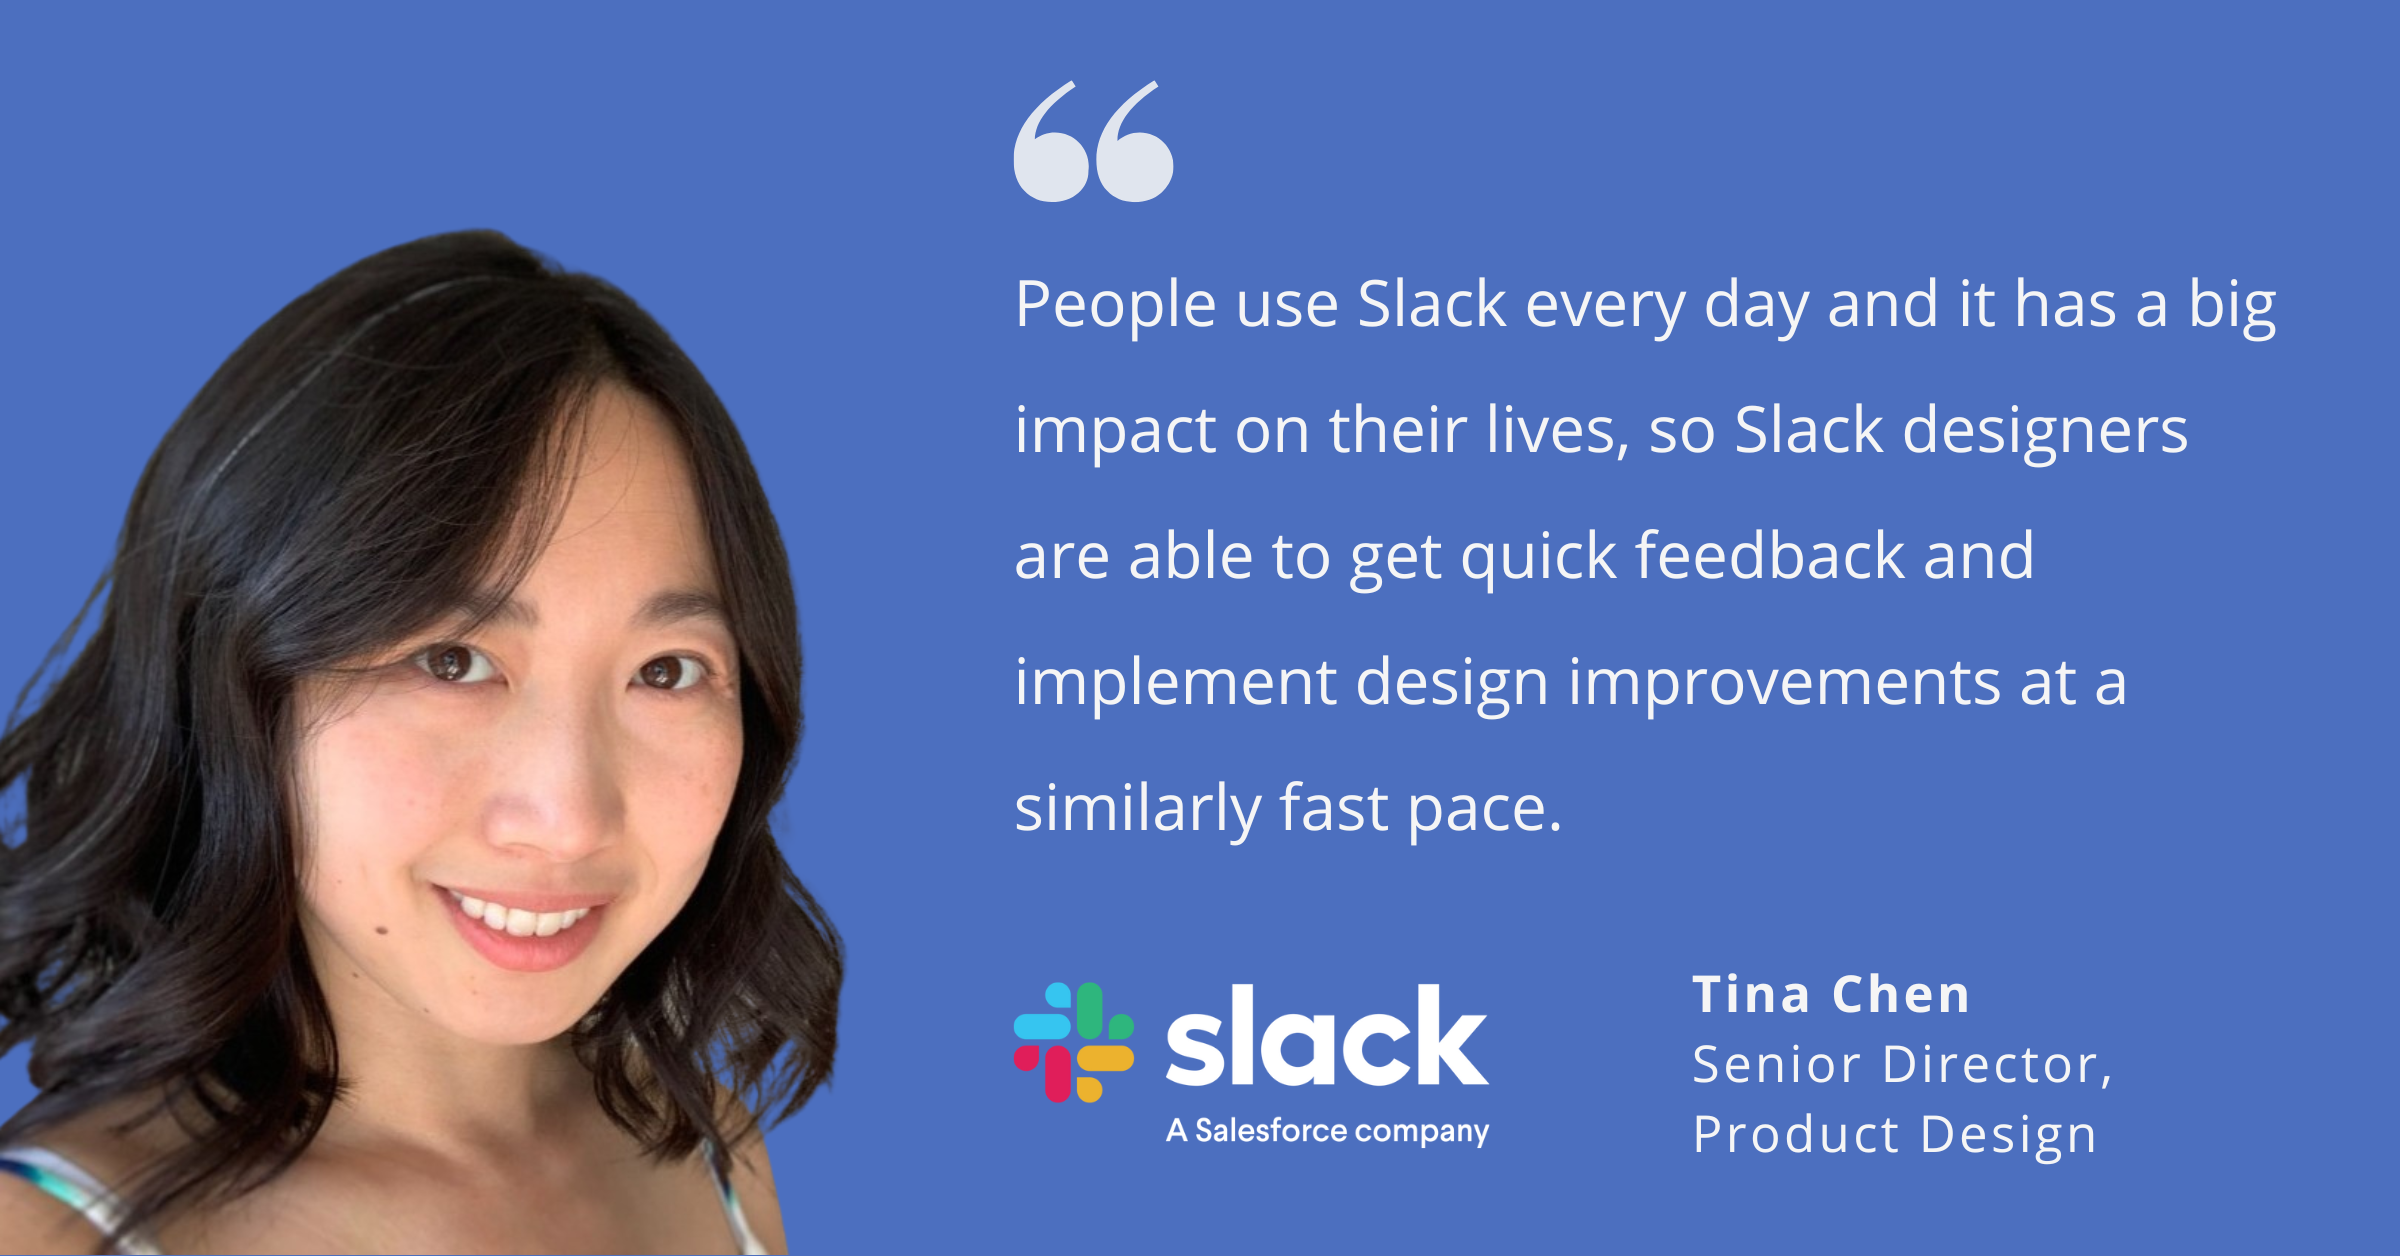 Inside Slack Canvas with the Sr. Director of Product Design